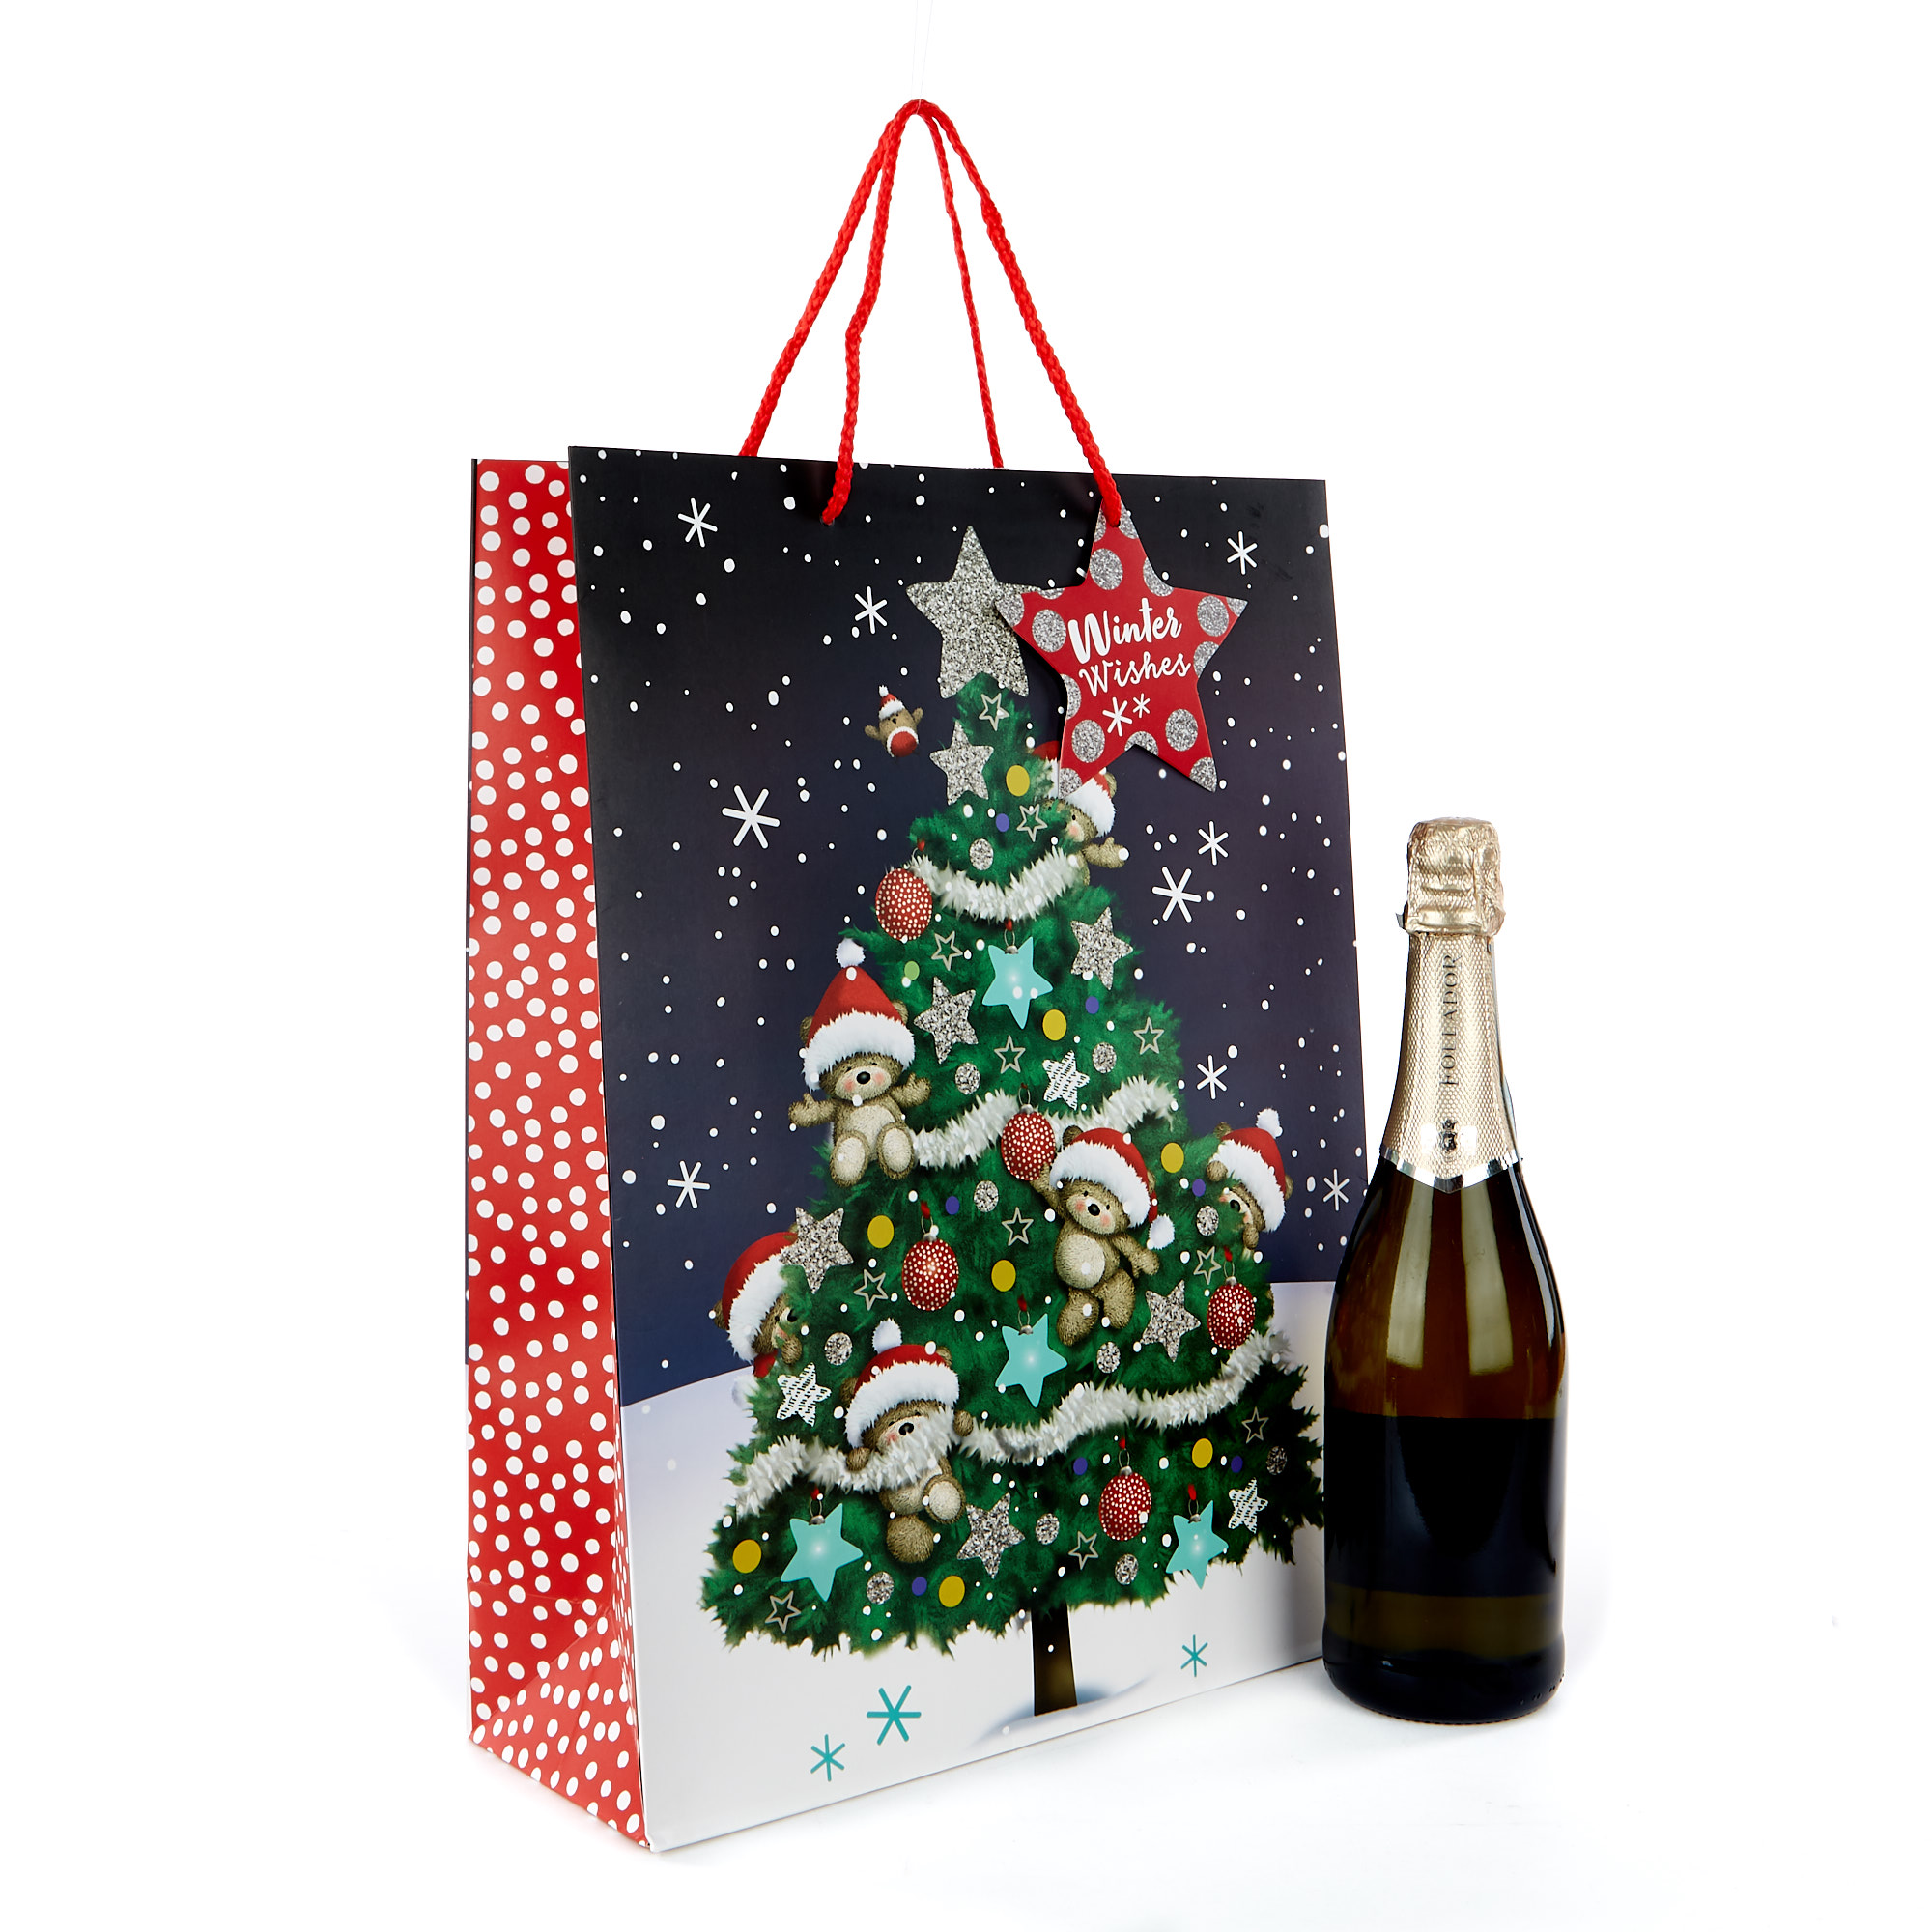 Extra Large Portrait Hugs Winter Wishes Christmas Gift Bag